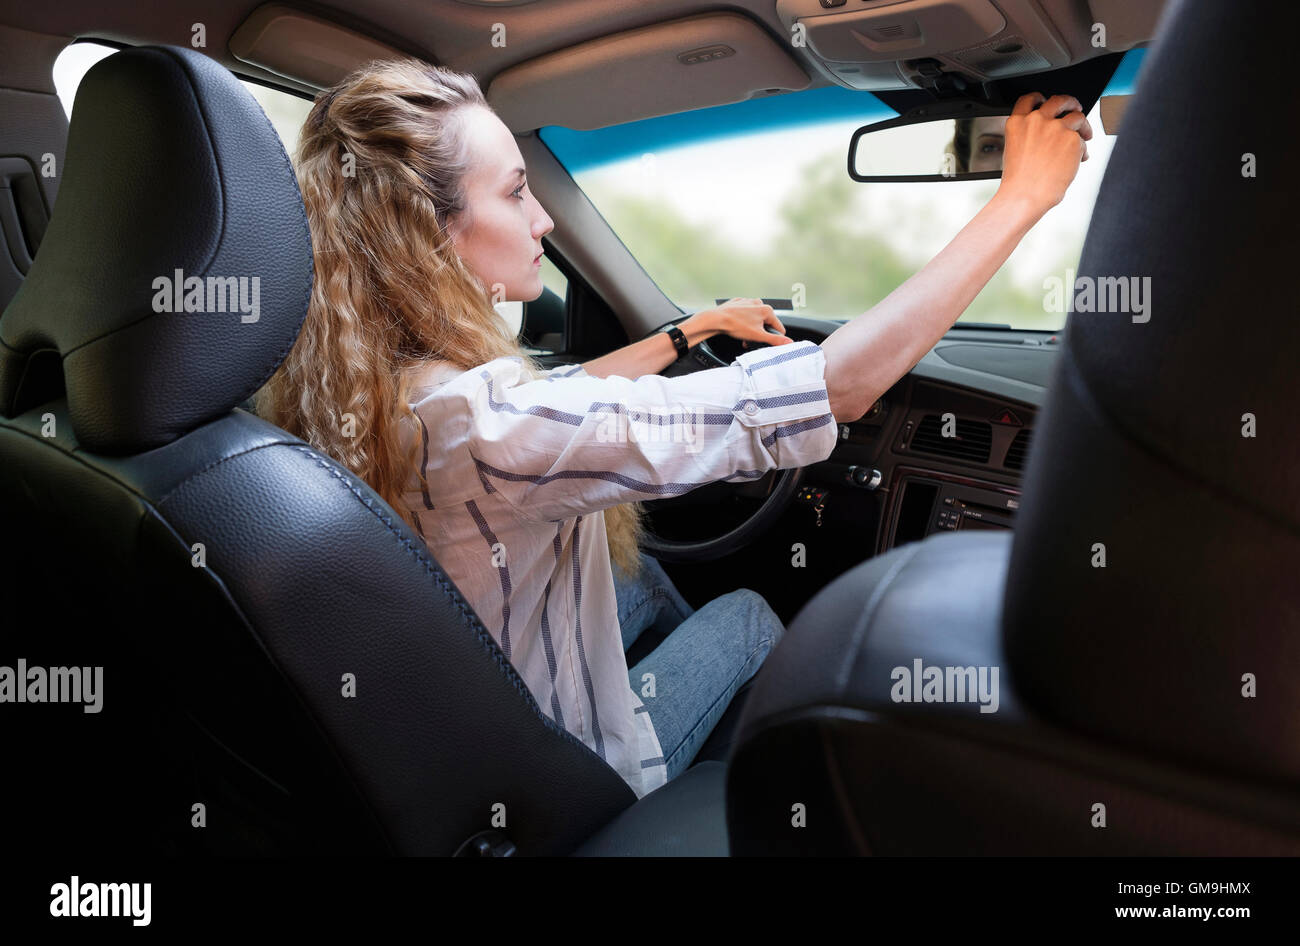 Woman adjusting rear-view mirror during driving car Stock Photo